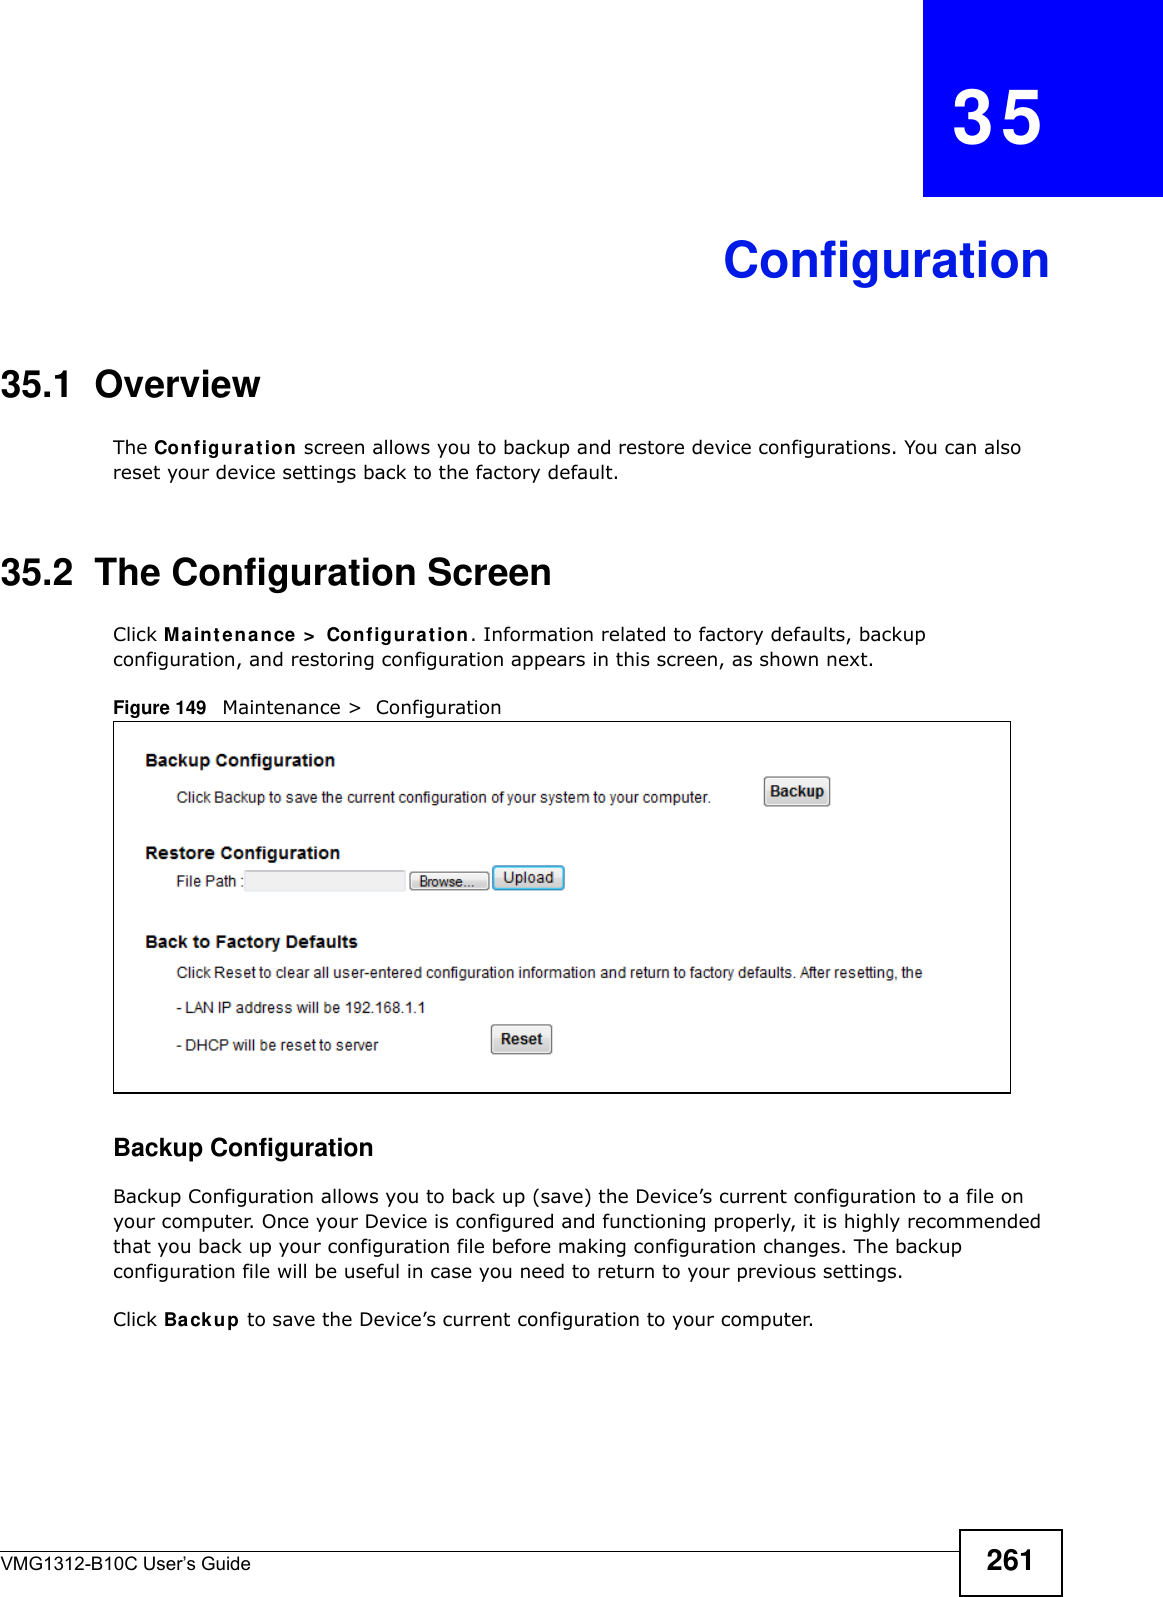 VMG1312-B10C User’s Guide 261CHAPTER   35Configuration35.1  OverviewThe Configurat ion screen allows you to backup and restore device configurations. You can also reset your device settings back to the factory default.35.2  The Configuration Screen Click M a in t e na n ce  &gt;  Con figu r a t ion. Information related to factory defaults, backup configuration, and restoring configuration appears in this screen, as shown next.Figure 149   Maintenance &gt;  ConfigurationBackup Configuration Backup Configuration allows you to back up (save) the Device’s current configuration to a file on your computer. Once your Device is configured and functioning properly, it is highly recommended that you back up your configuration file before making configuration changes. The backup configuration file will be useful in case you need to return to your previous settings. Click Ba ck u p to save the Device’s current configuration to your computer.